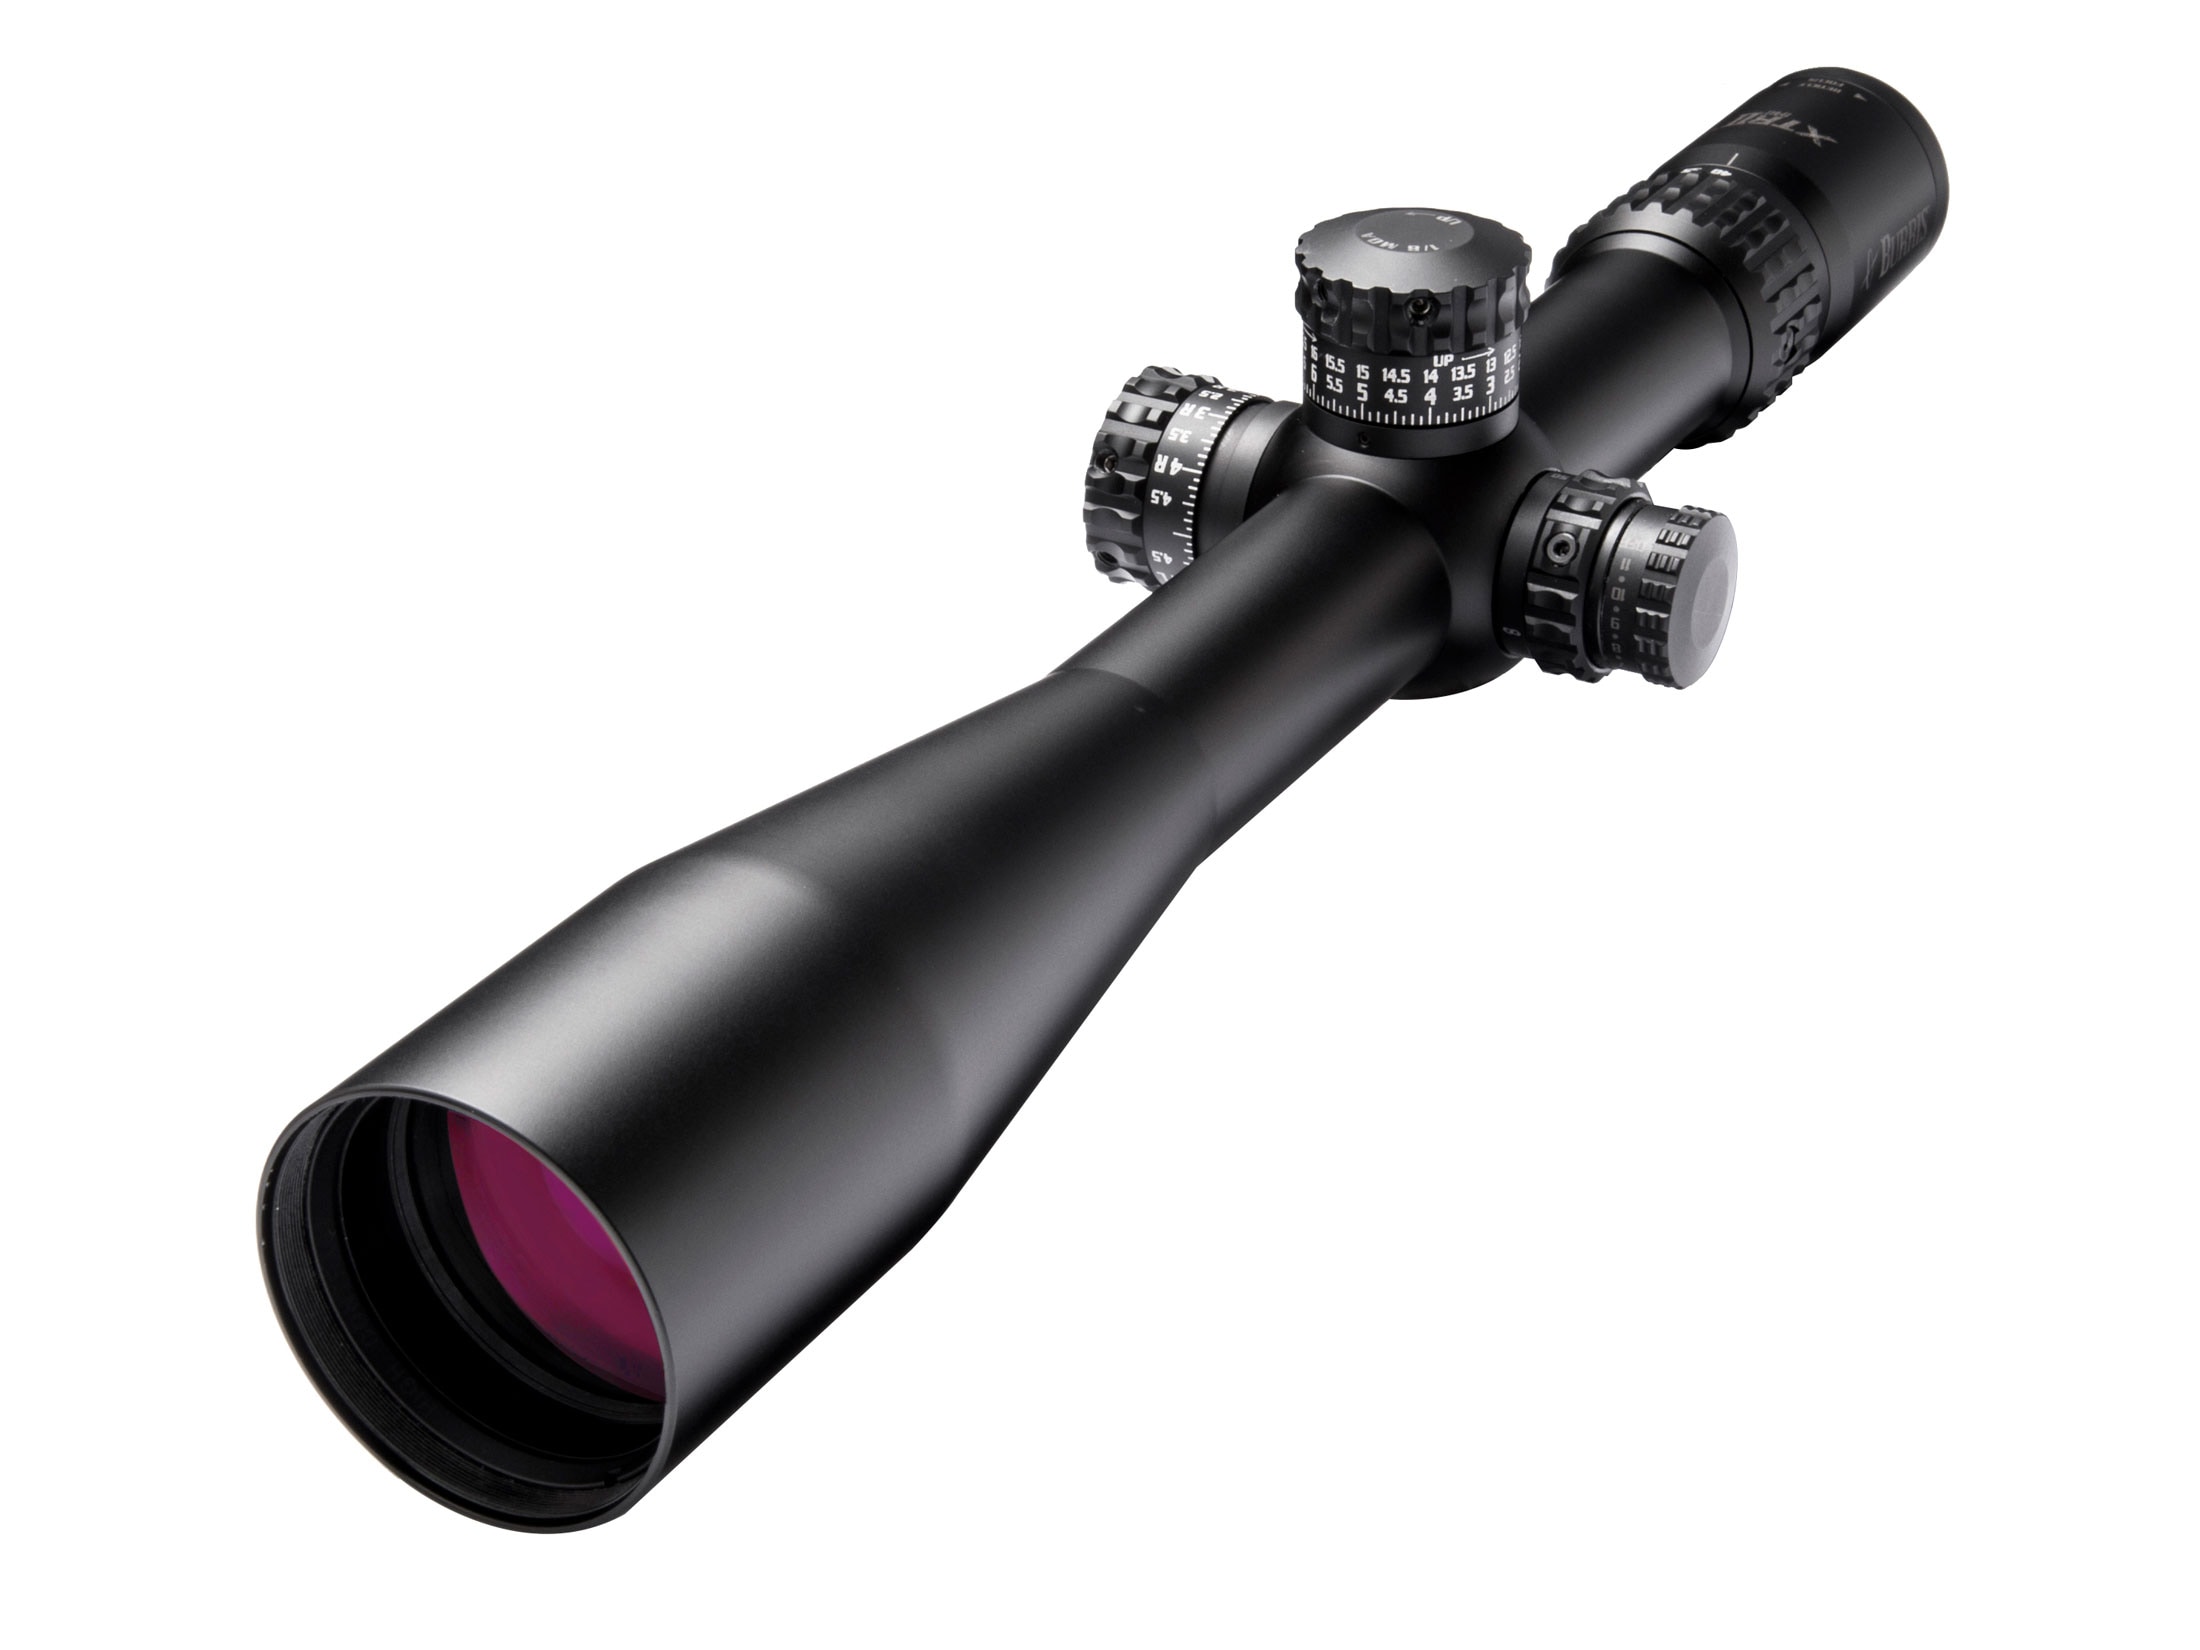 Burris Xtreme Tactical XTR II F-Class Rifle Scope 34mm Tube 8-40x 50mm Side Focus First Focal Plane 1/8 MOA Adjustments Illuminated F-Class MOA Reticle Matte For Sale